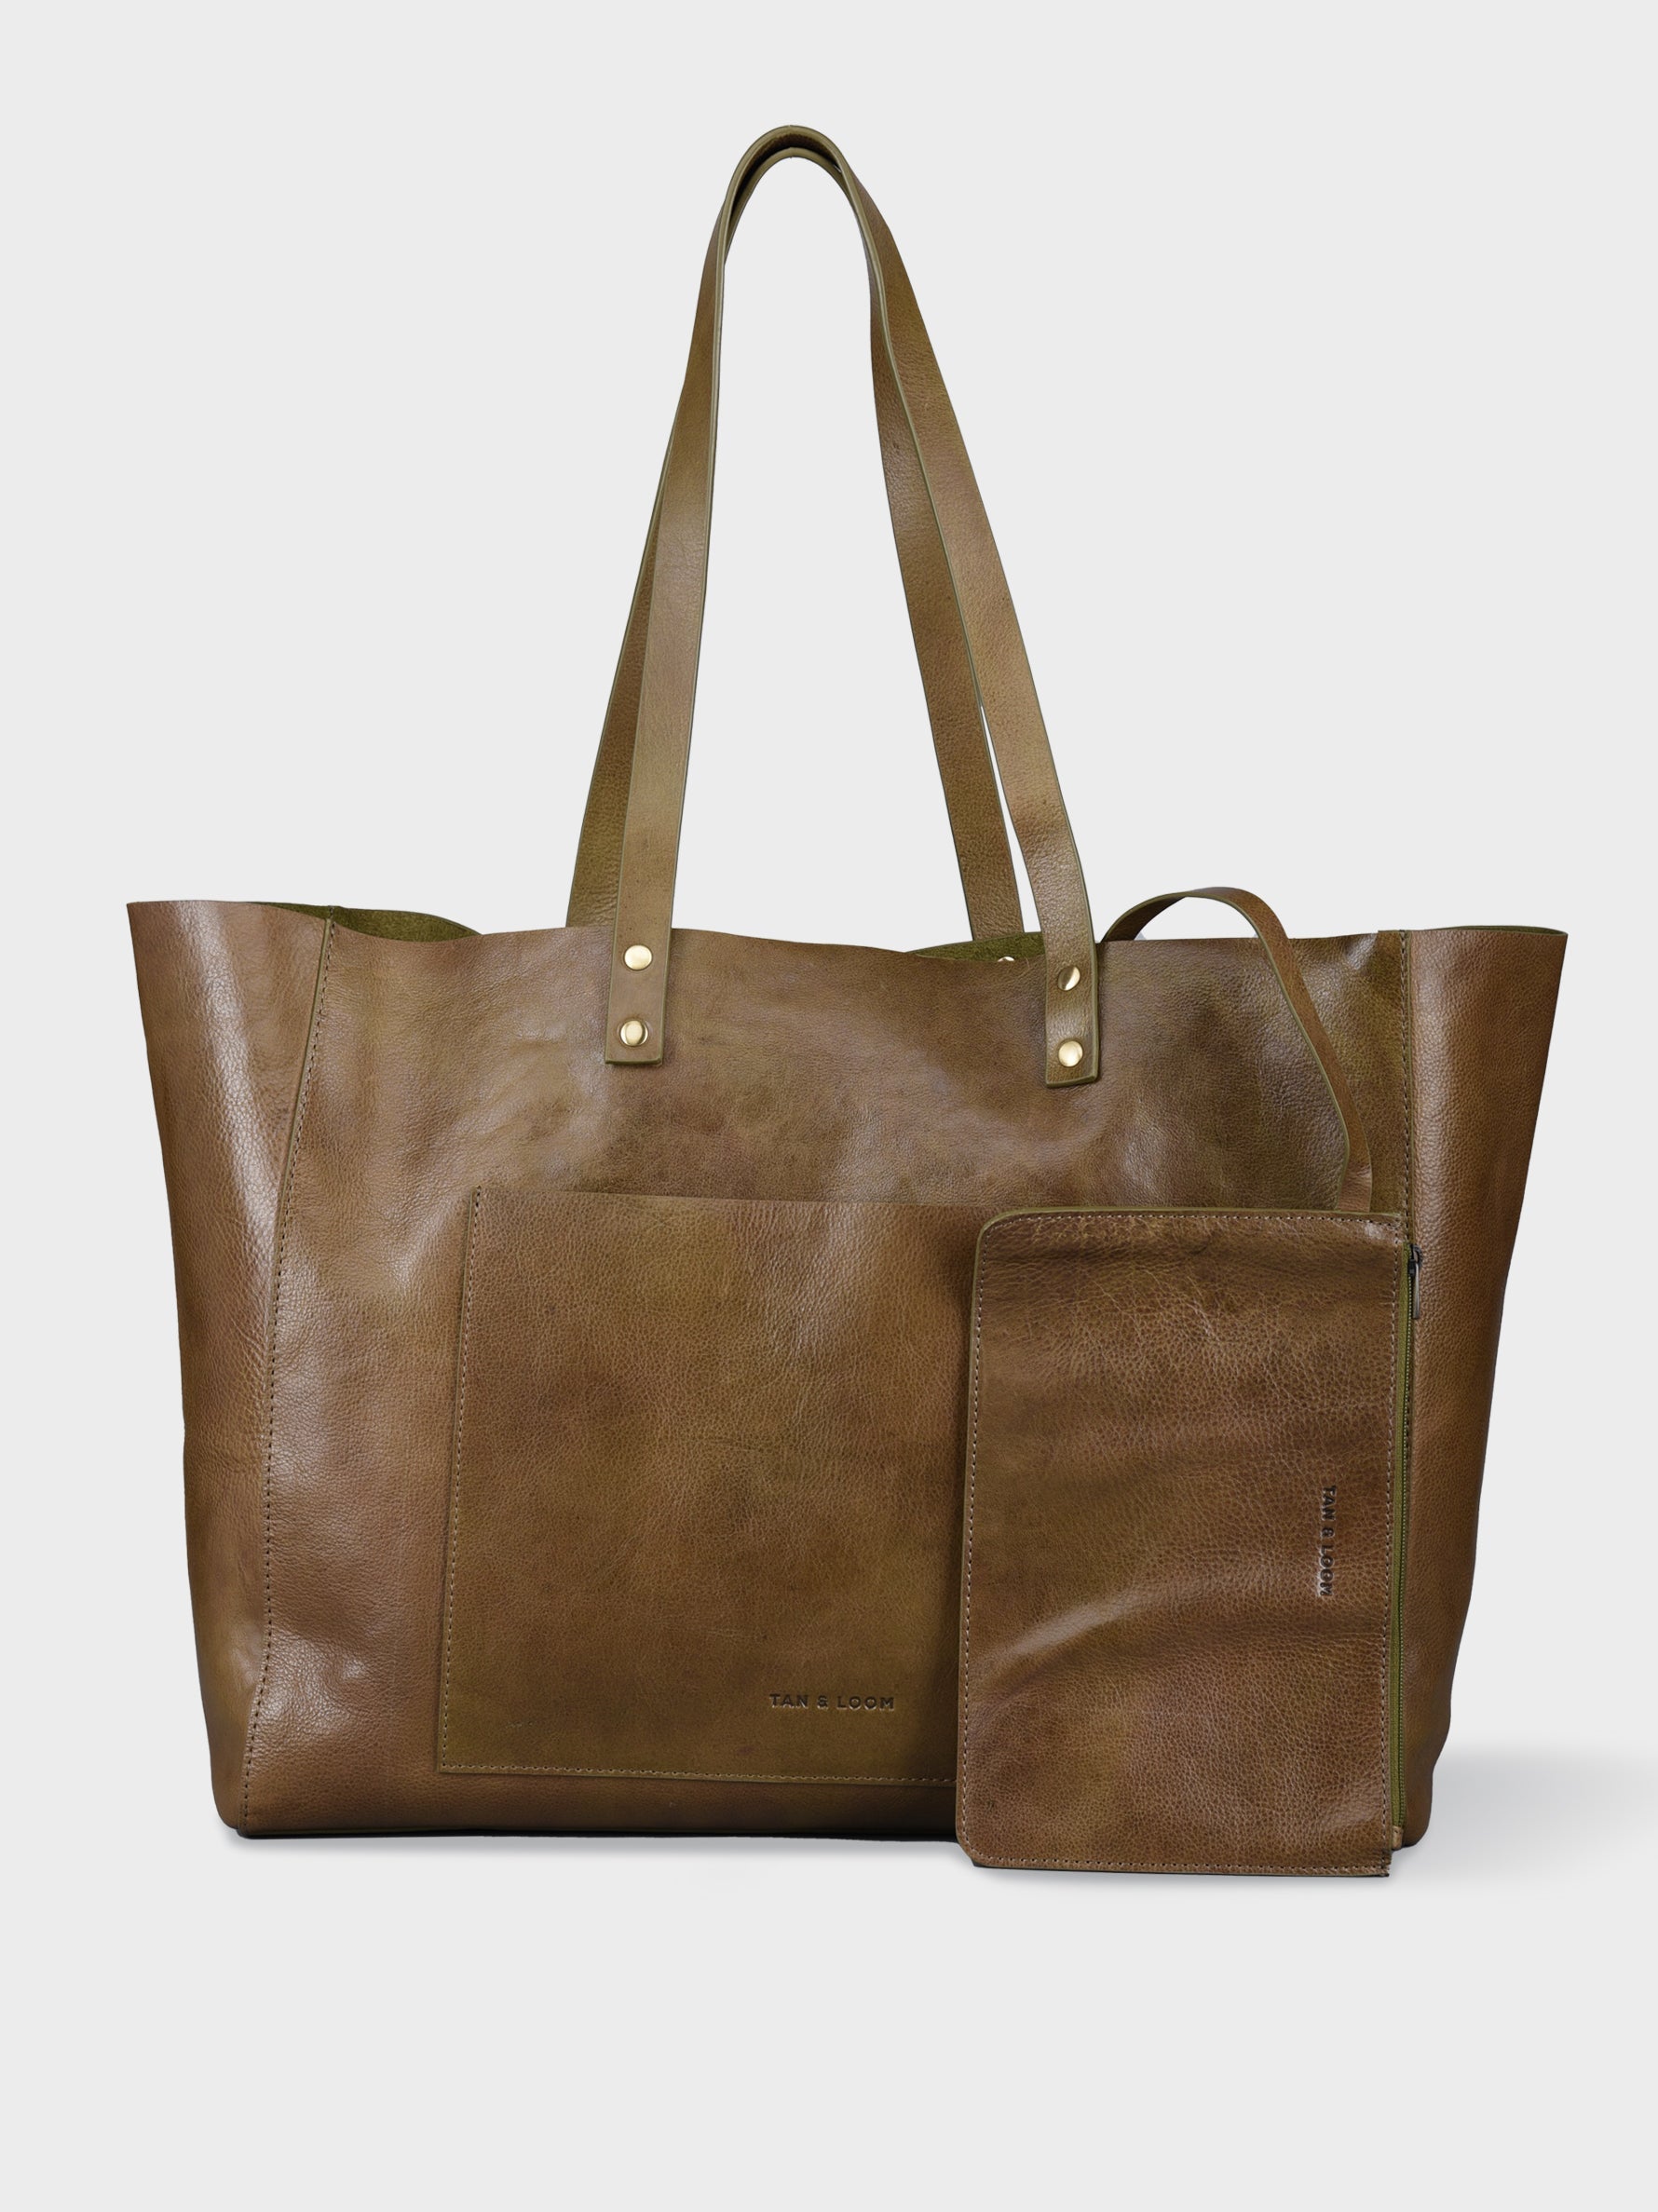 Handcrafted Genuine Vegetable Tanned Leather Old Fashioned Tote Large Olive Green for Women Tan & Loom